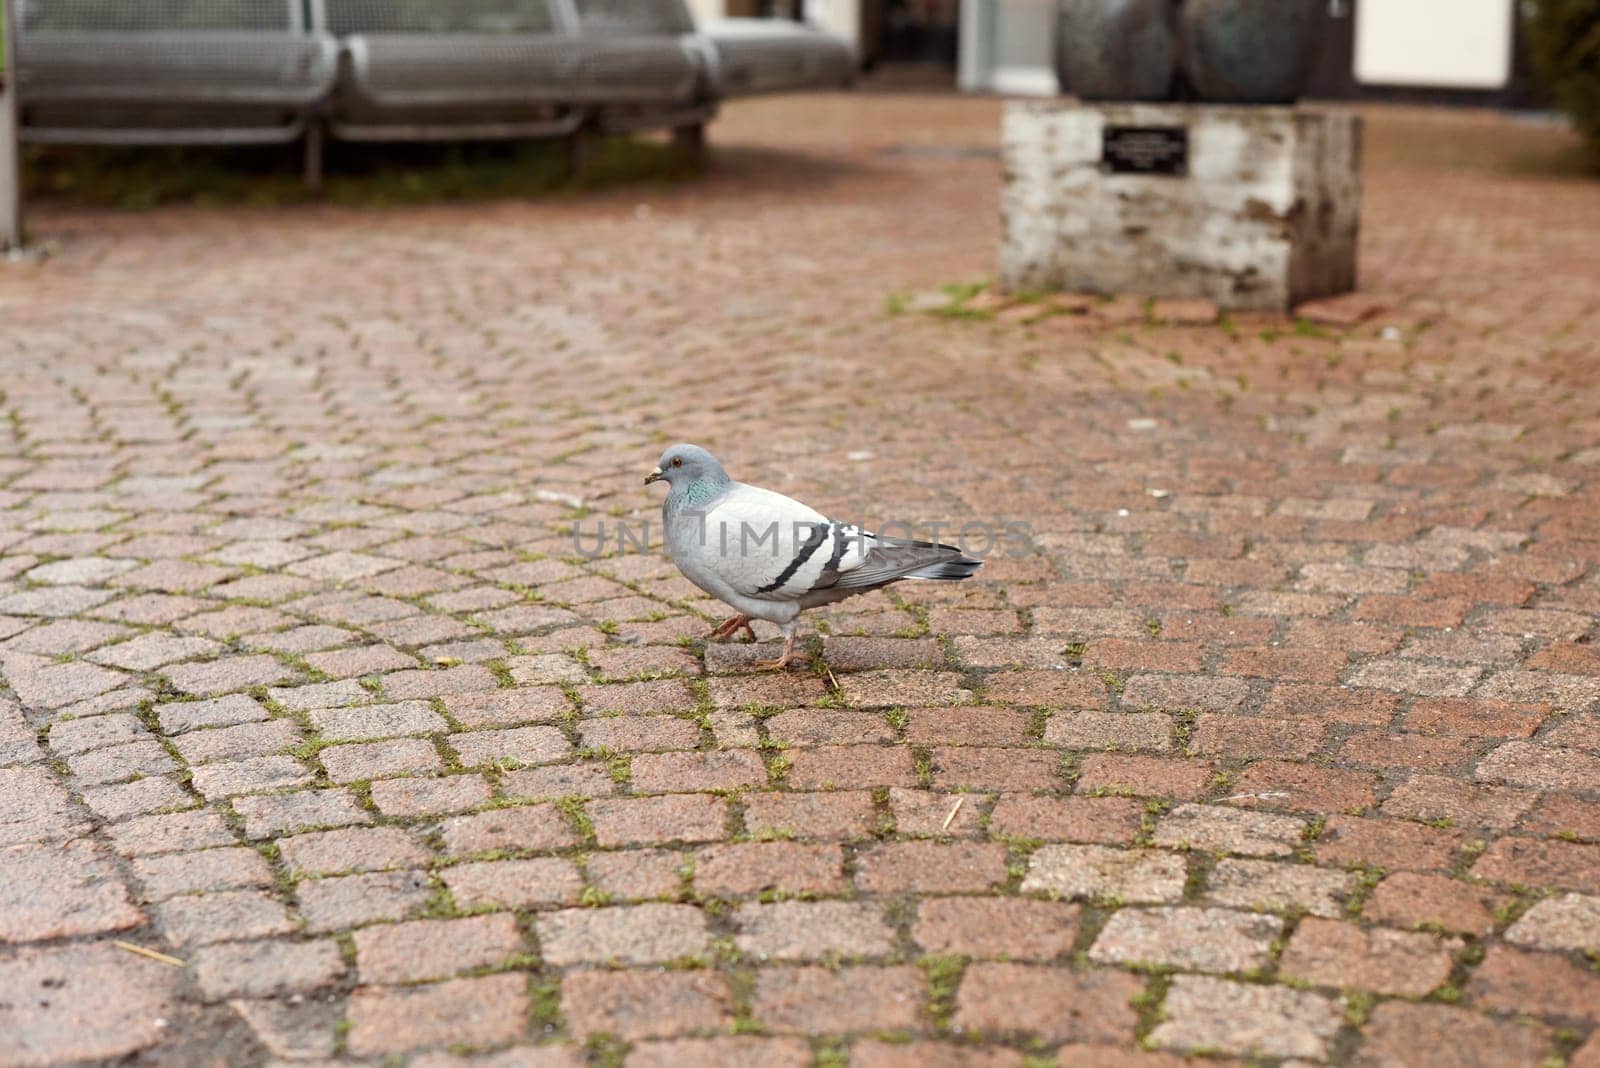 Urban Pigeon on Pavement Walkway. Witness the simplicity of urban life with this image capturing a pigeon leisurely strolling along a tiled pavement walkway. The photograph beautifully showcases the graceful movement of the bird on the well-paved path, adding a touch of tranquility to the urban environment.